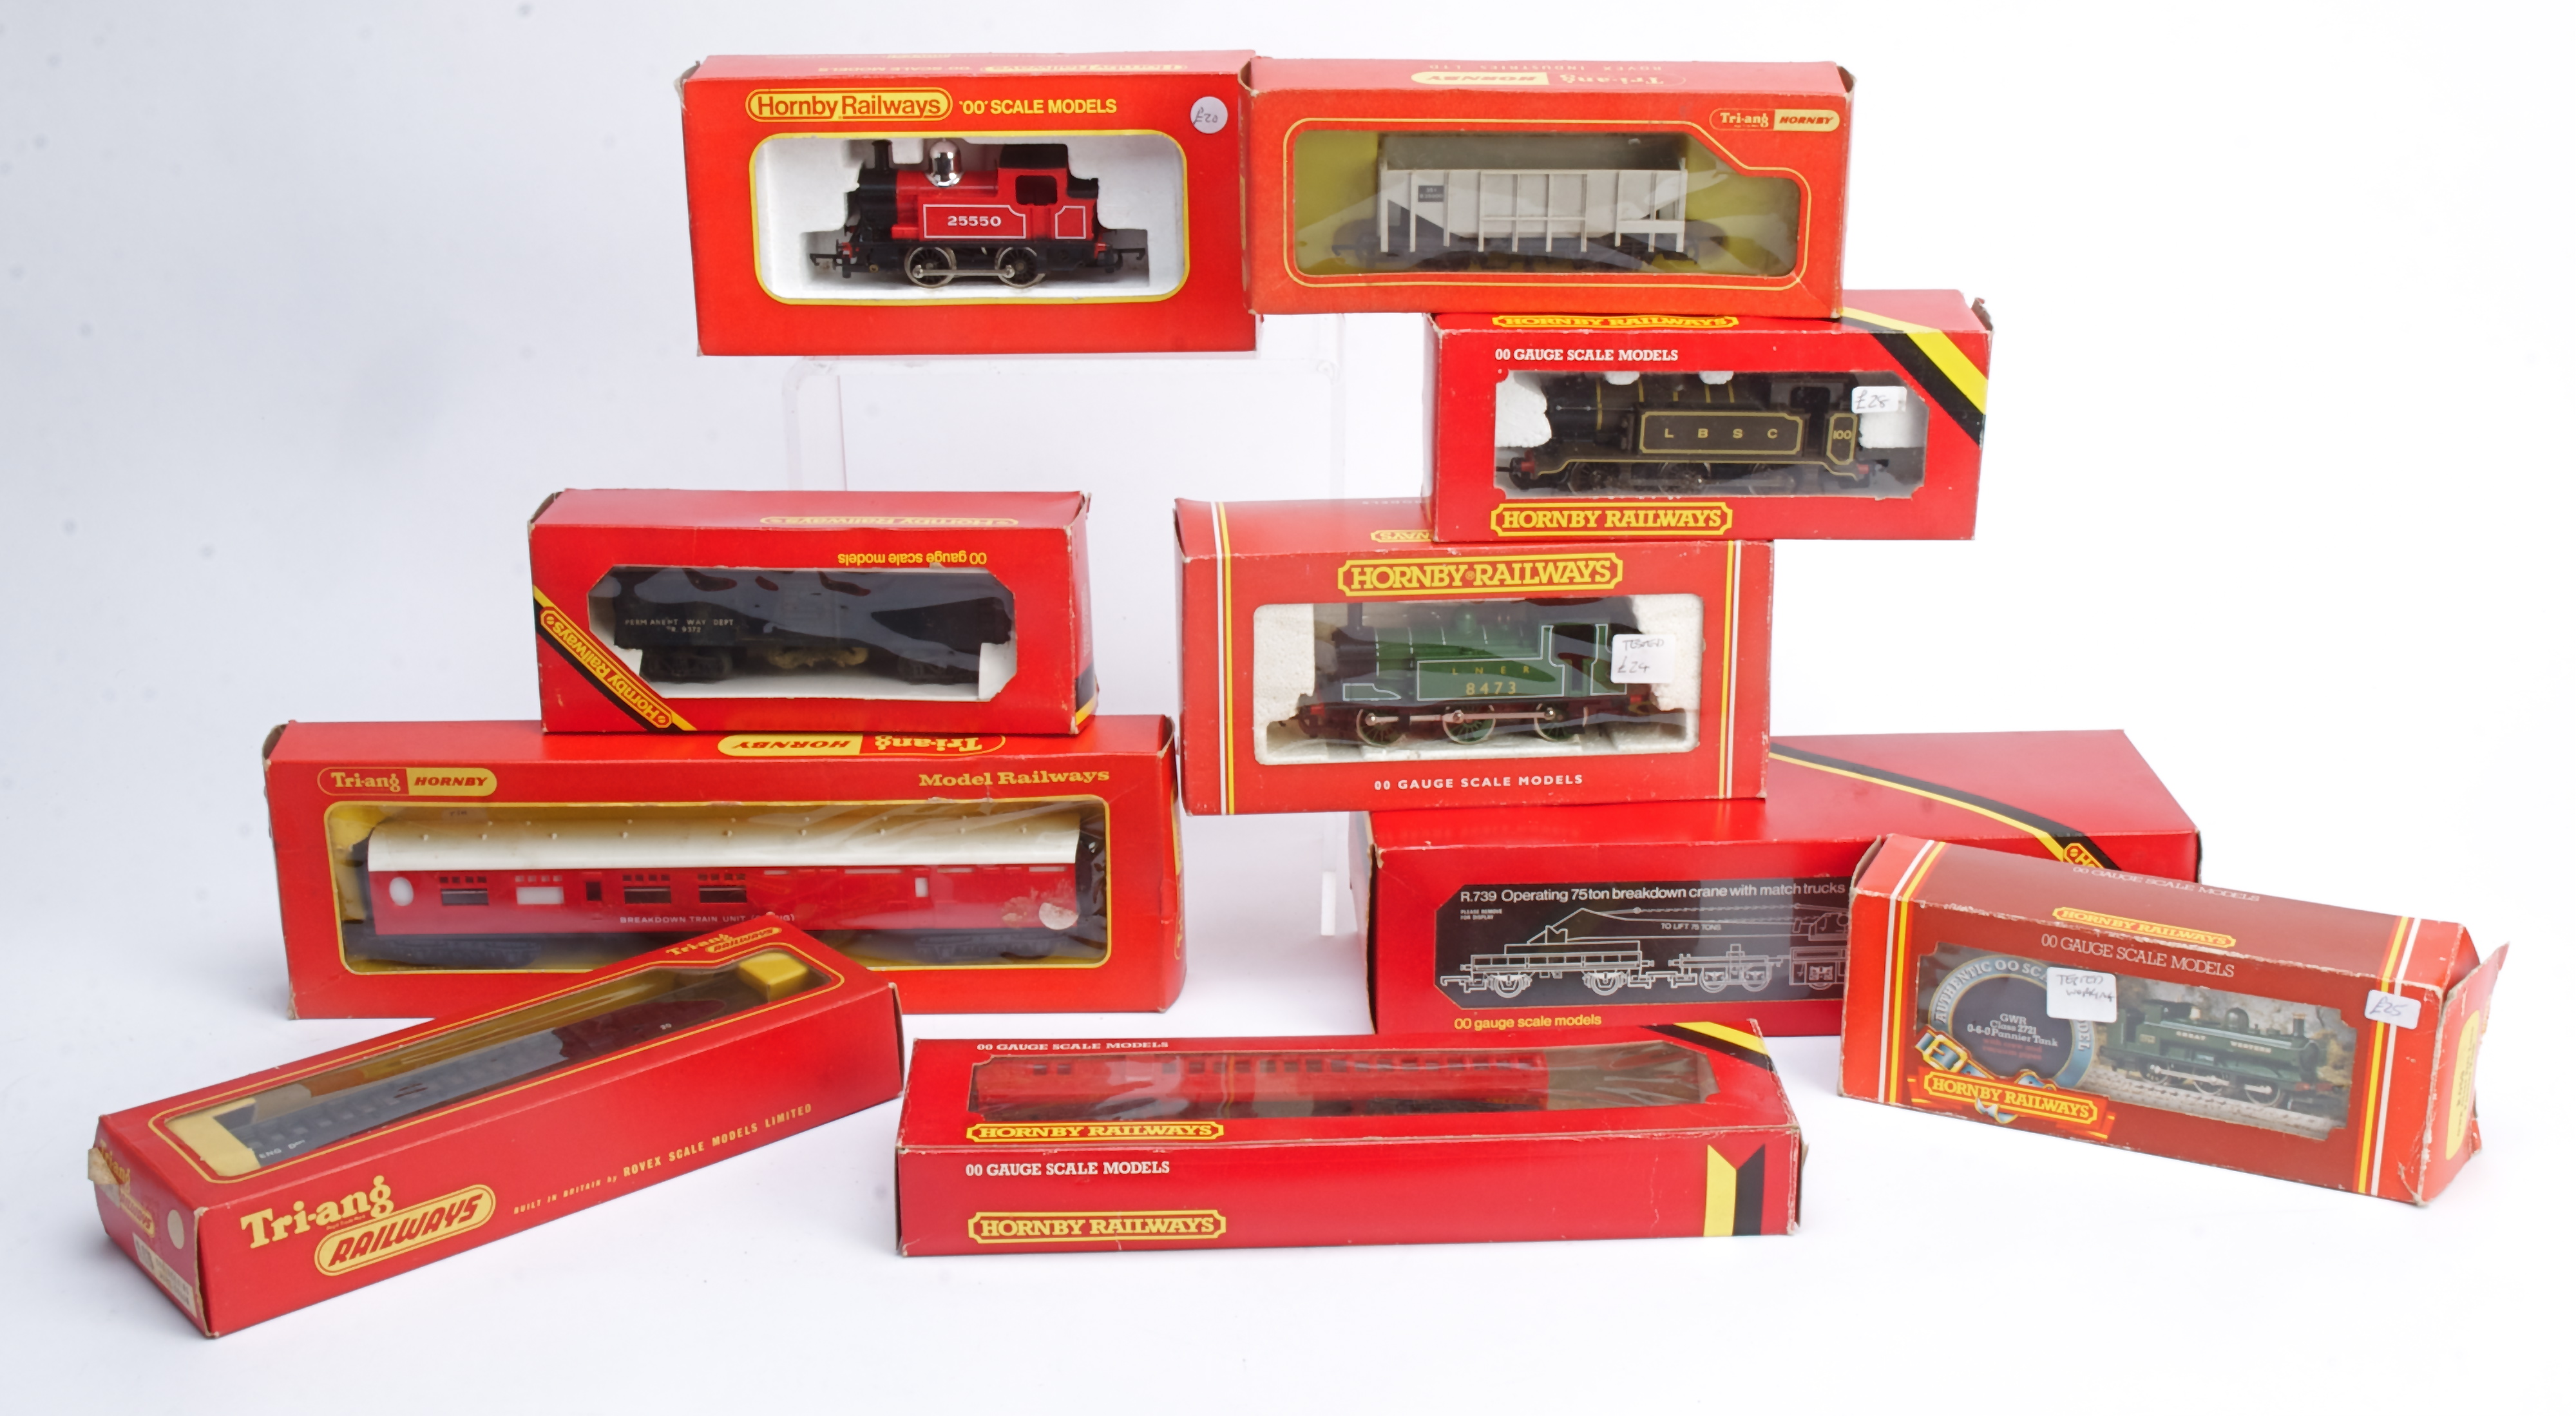 Hornby 00 Gauge tank Locomotives Breakdown Crane and Tri-ang related coaches and other items,